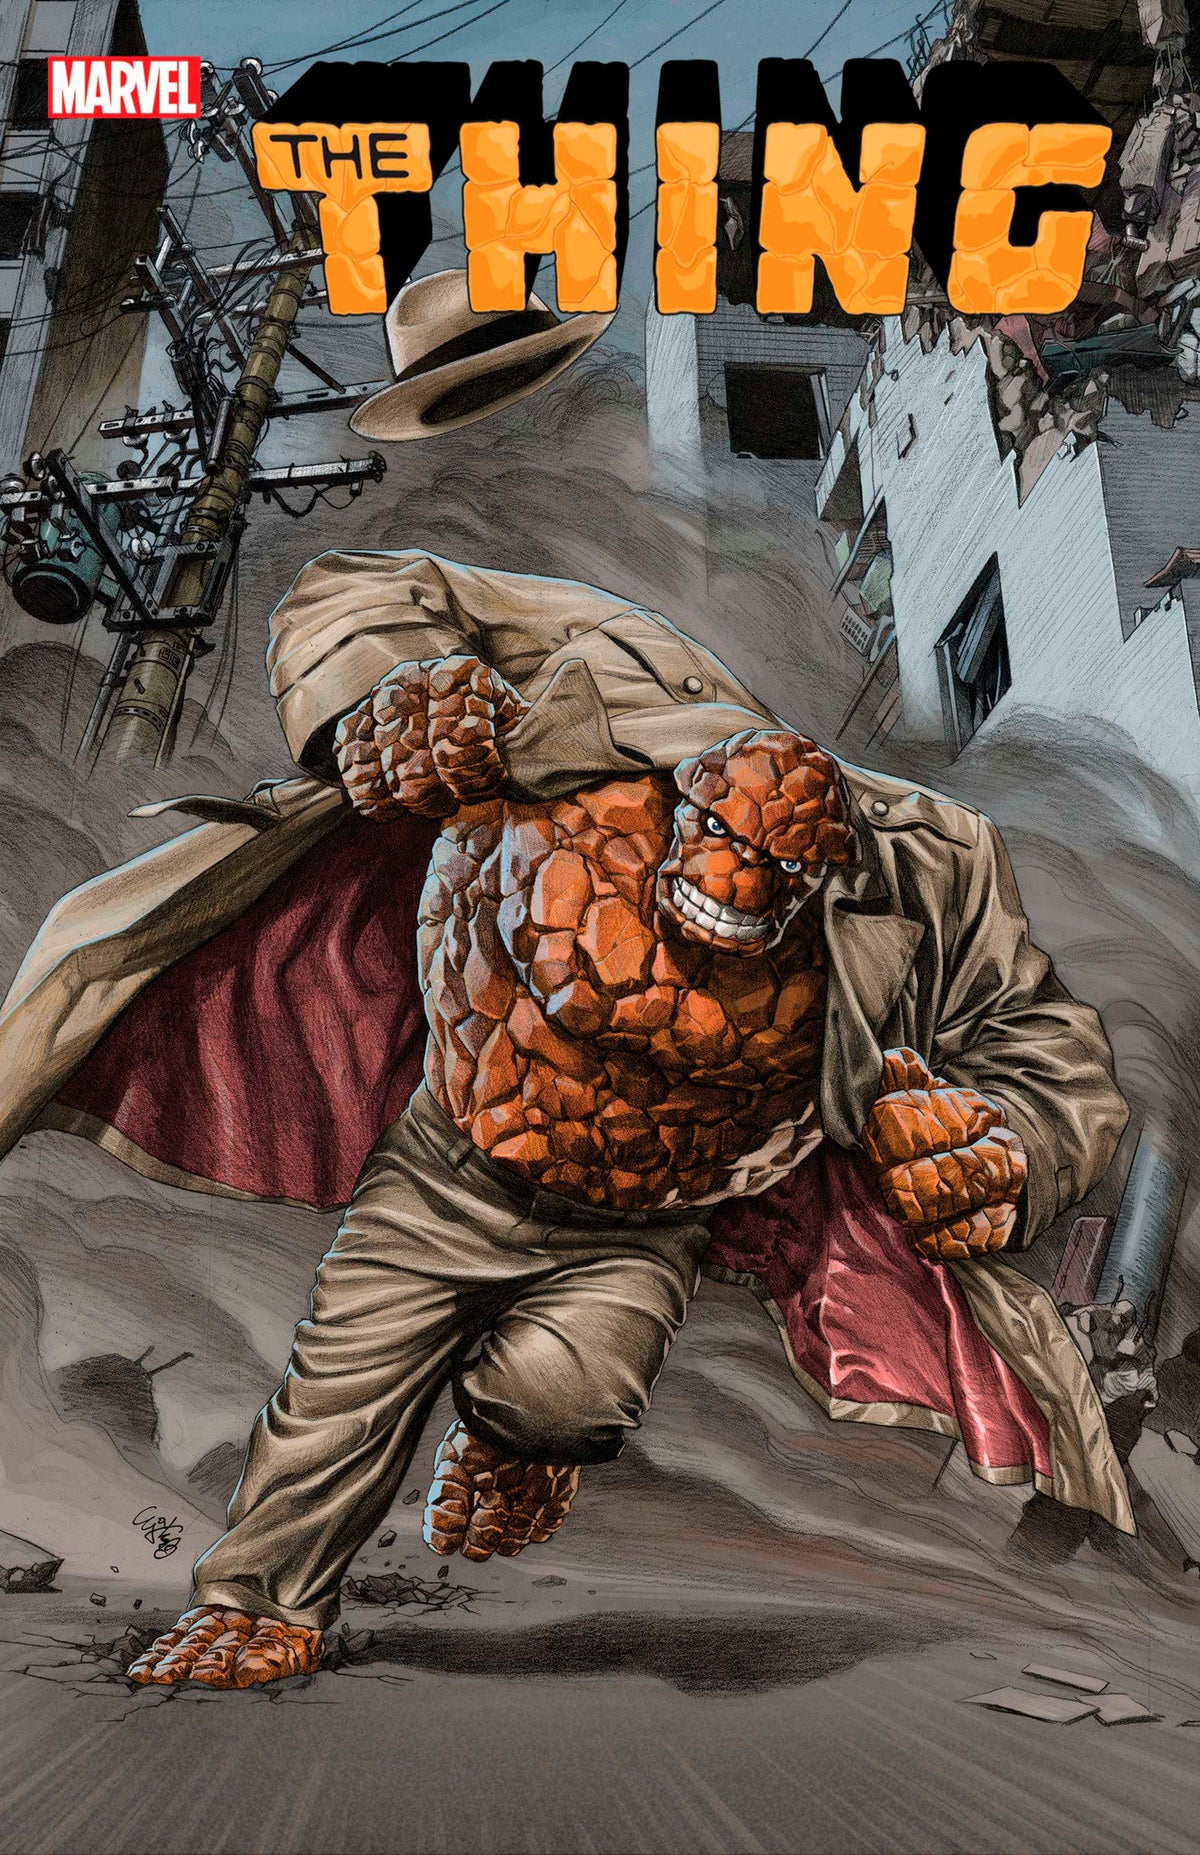 Image of The Thing 3 Su Variant comic sold by Stronghold Collectibles.